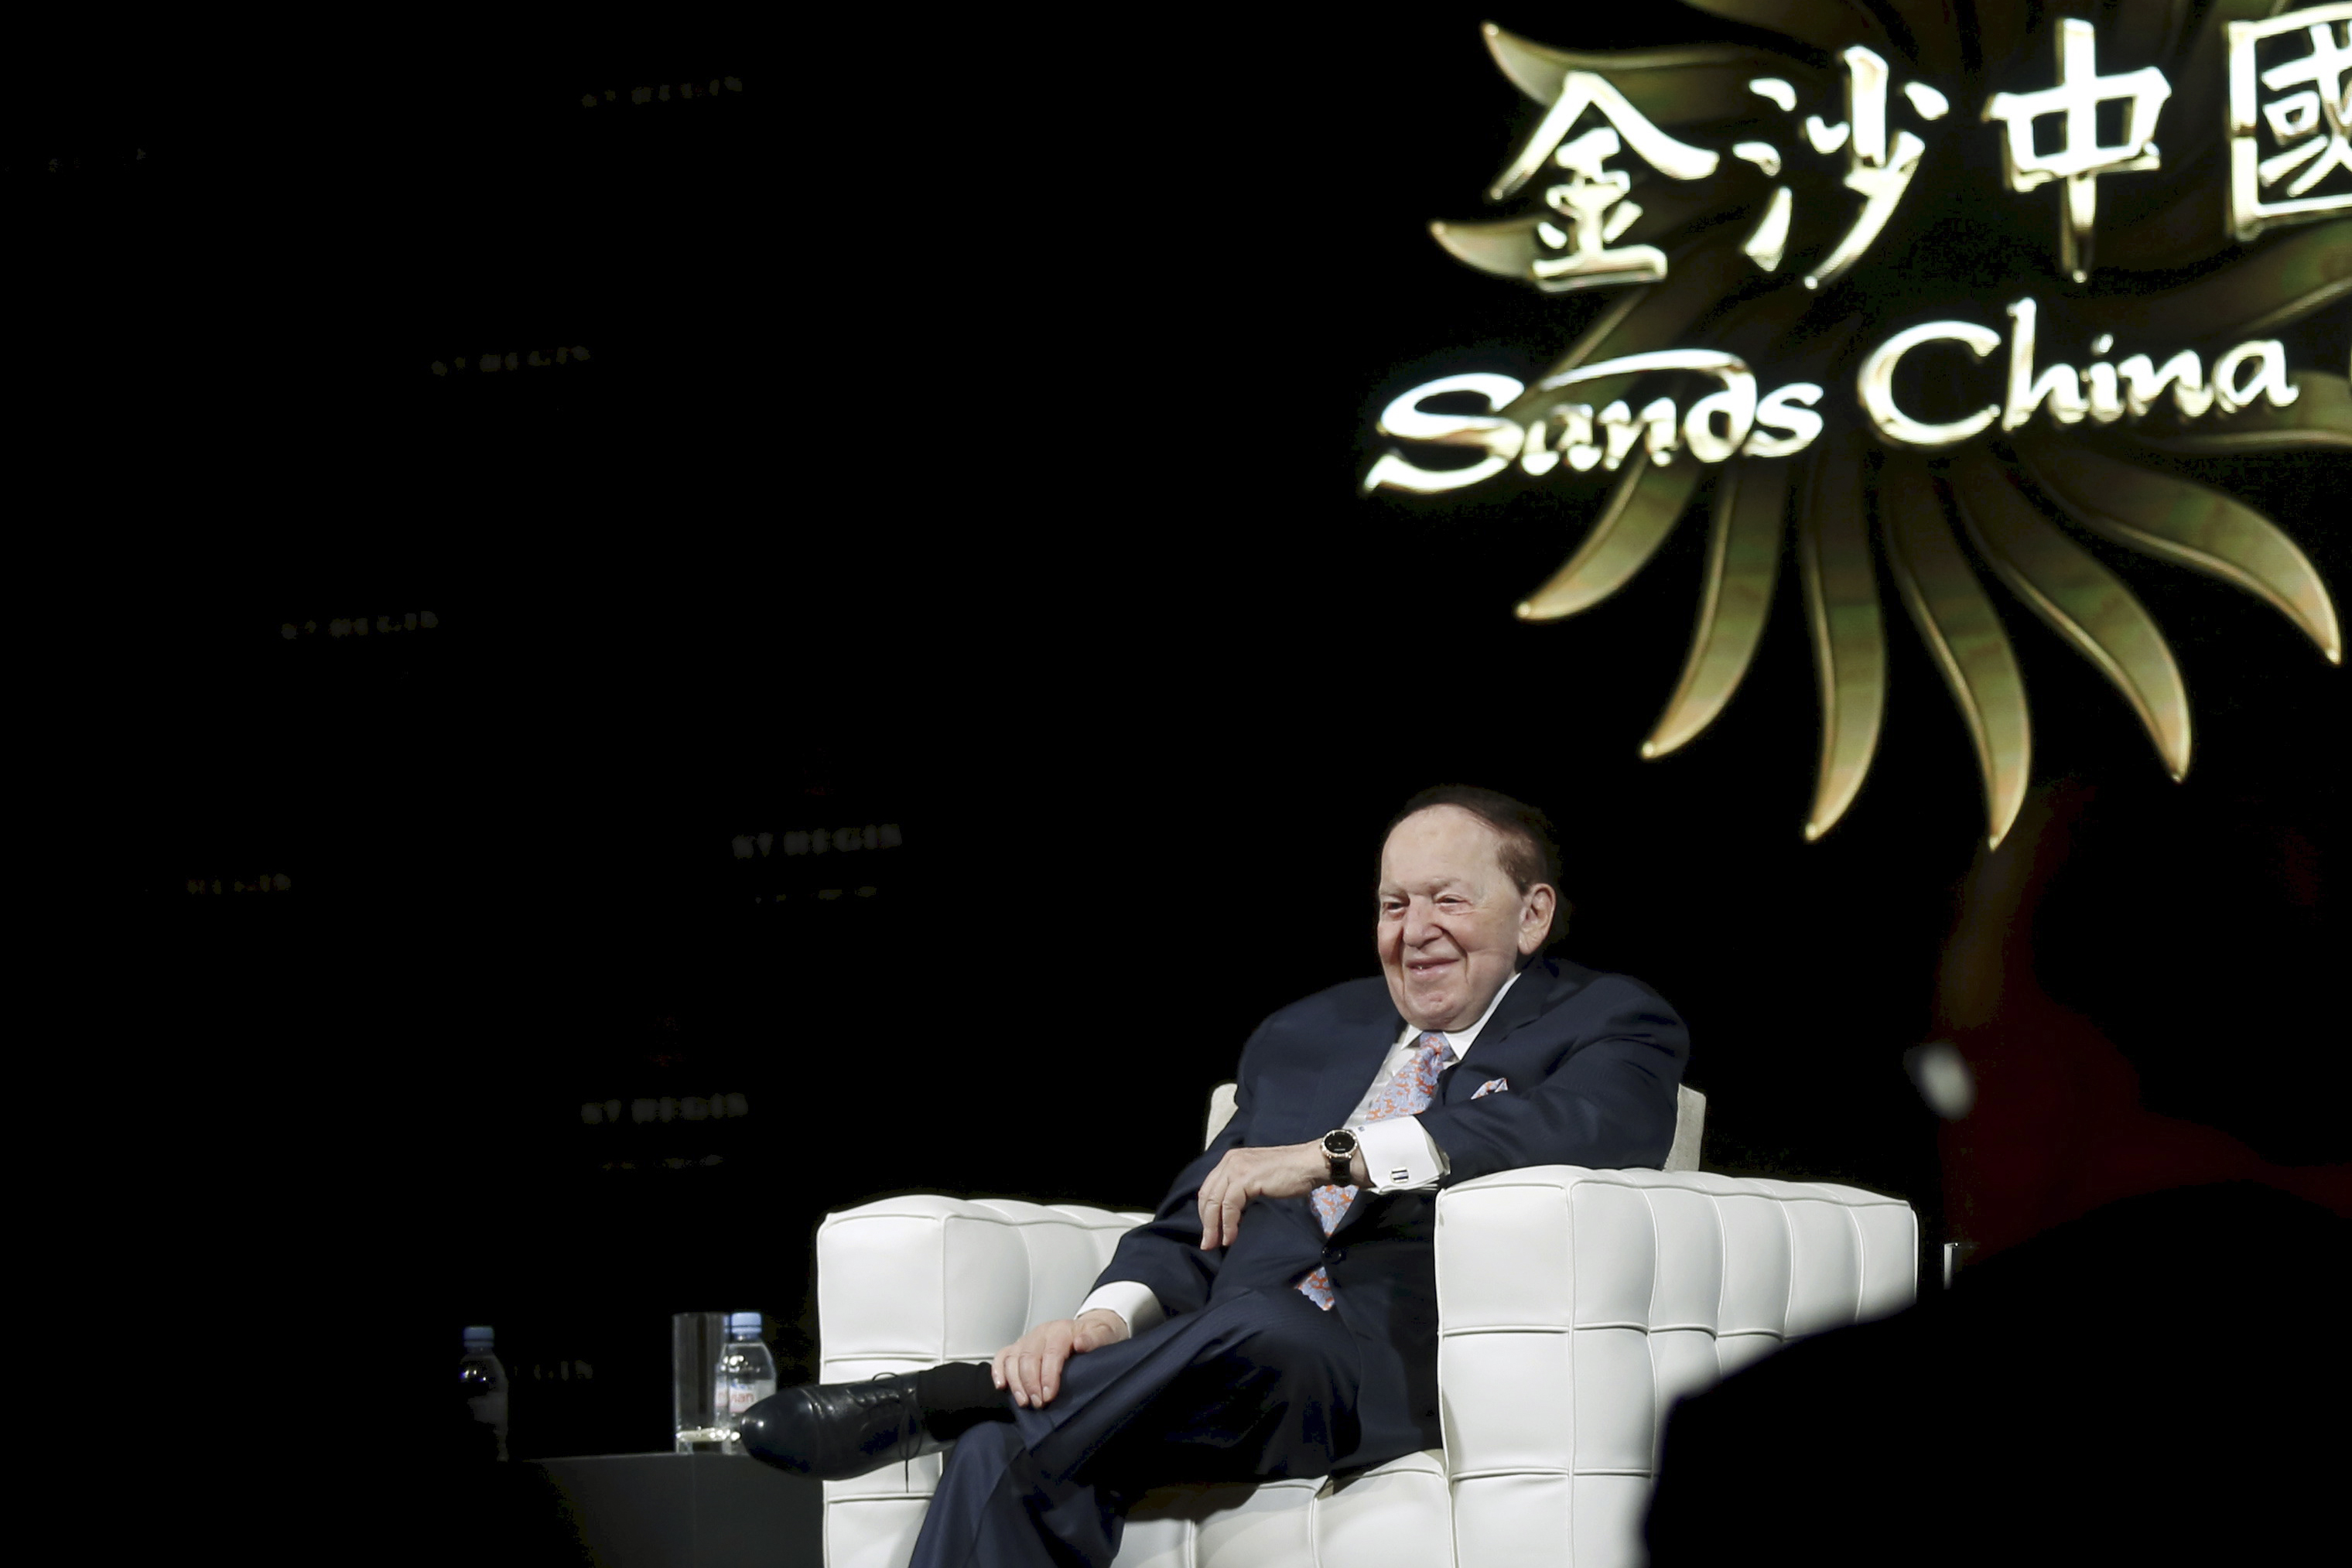 Gambling giant Las Vegas Sands Corp's Chief Executive Sheldon Adelson smiles during a news conference in Macau, China December 18, 2015.